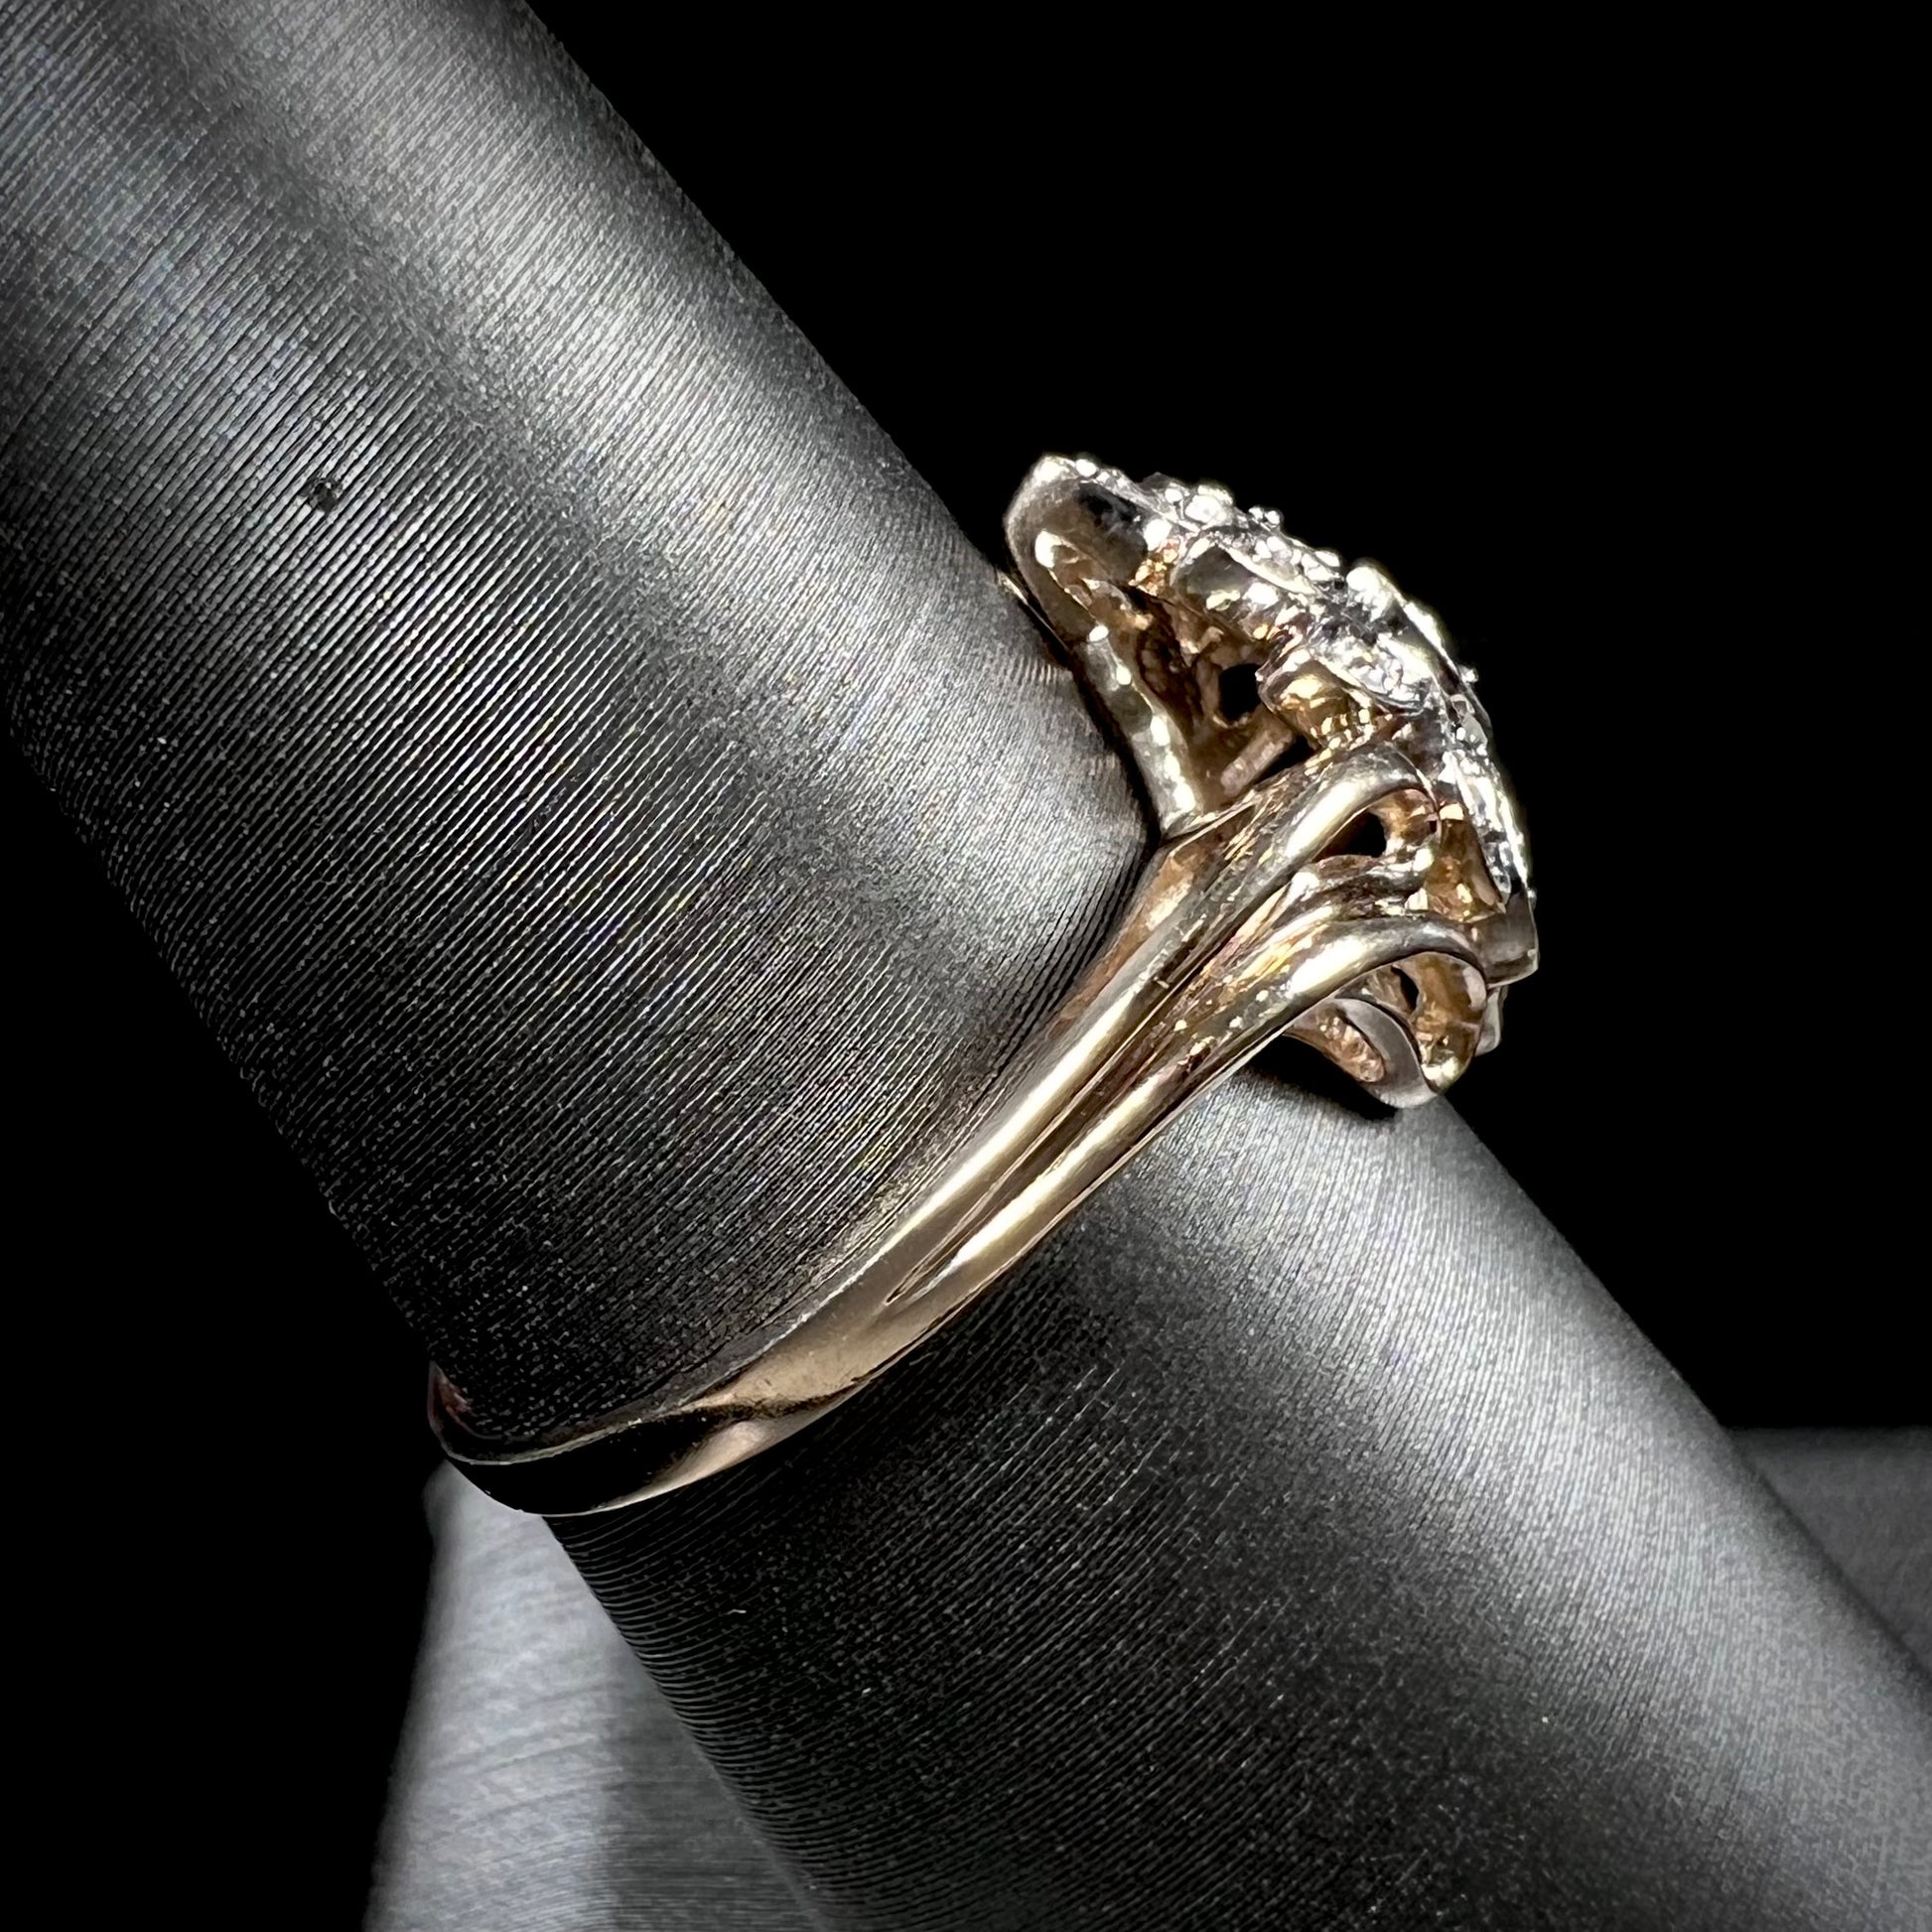 A ladies' vintage style gold diamond cluster ring.